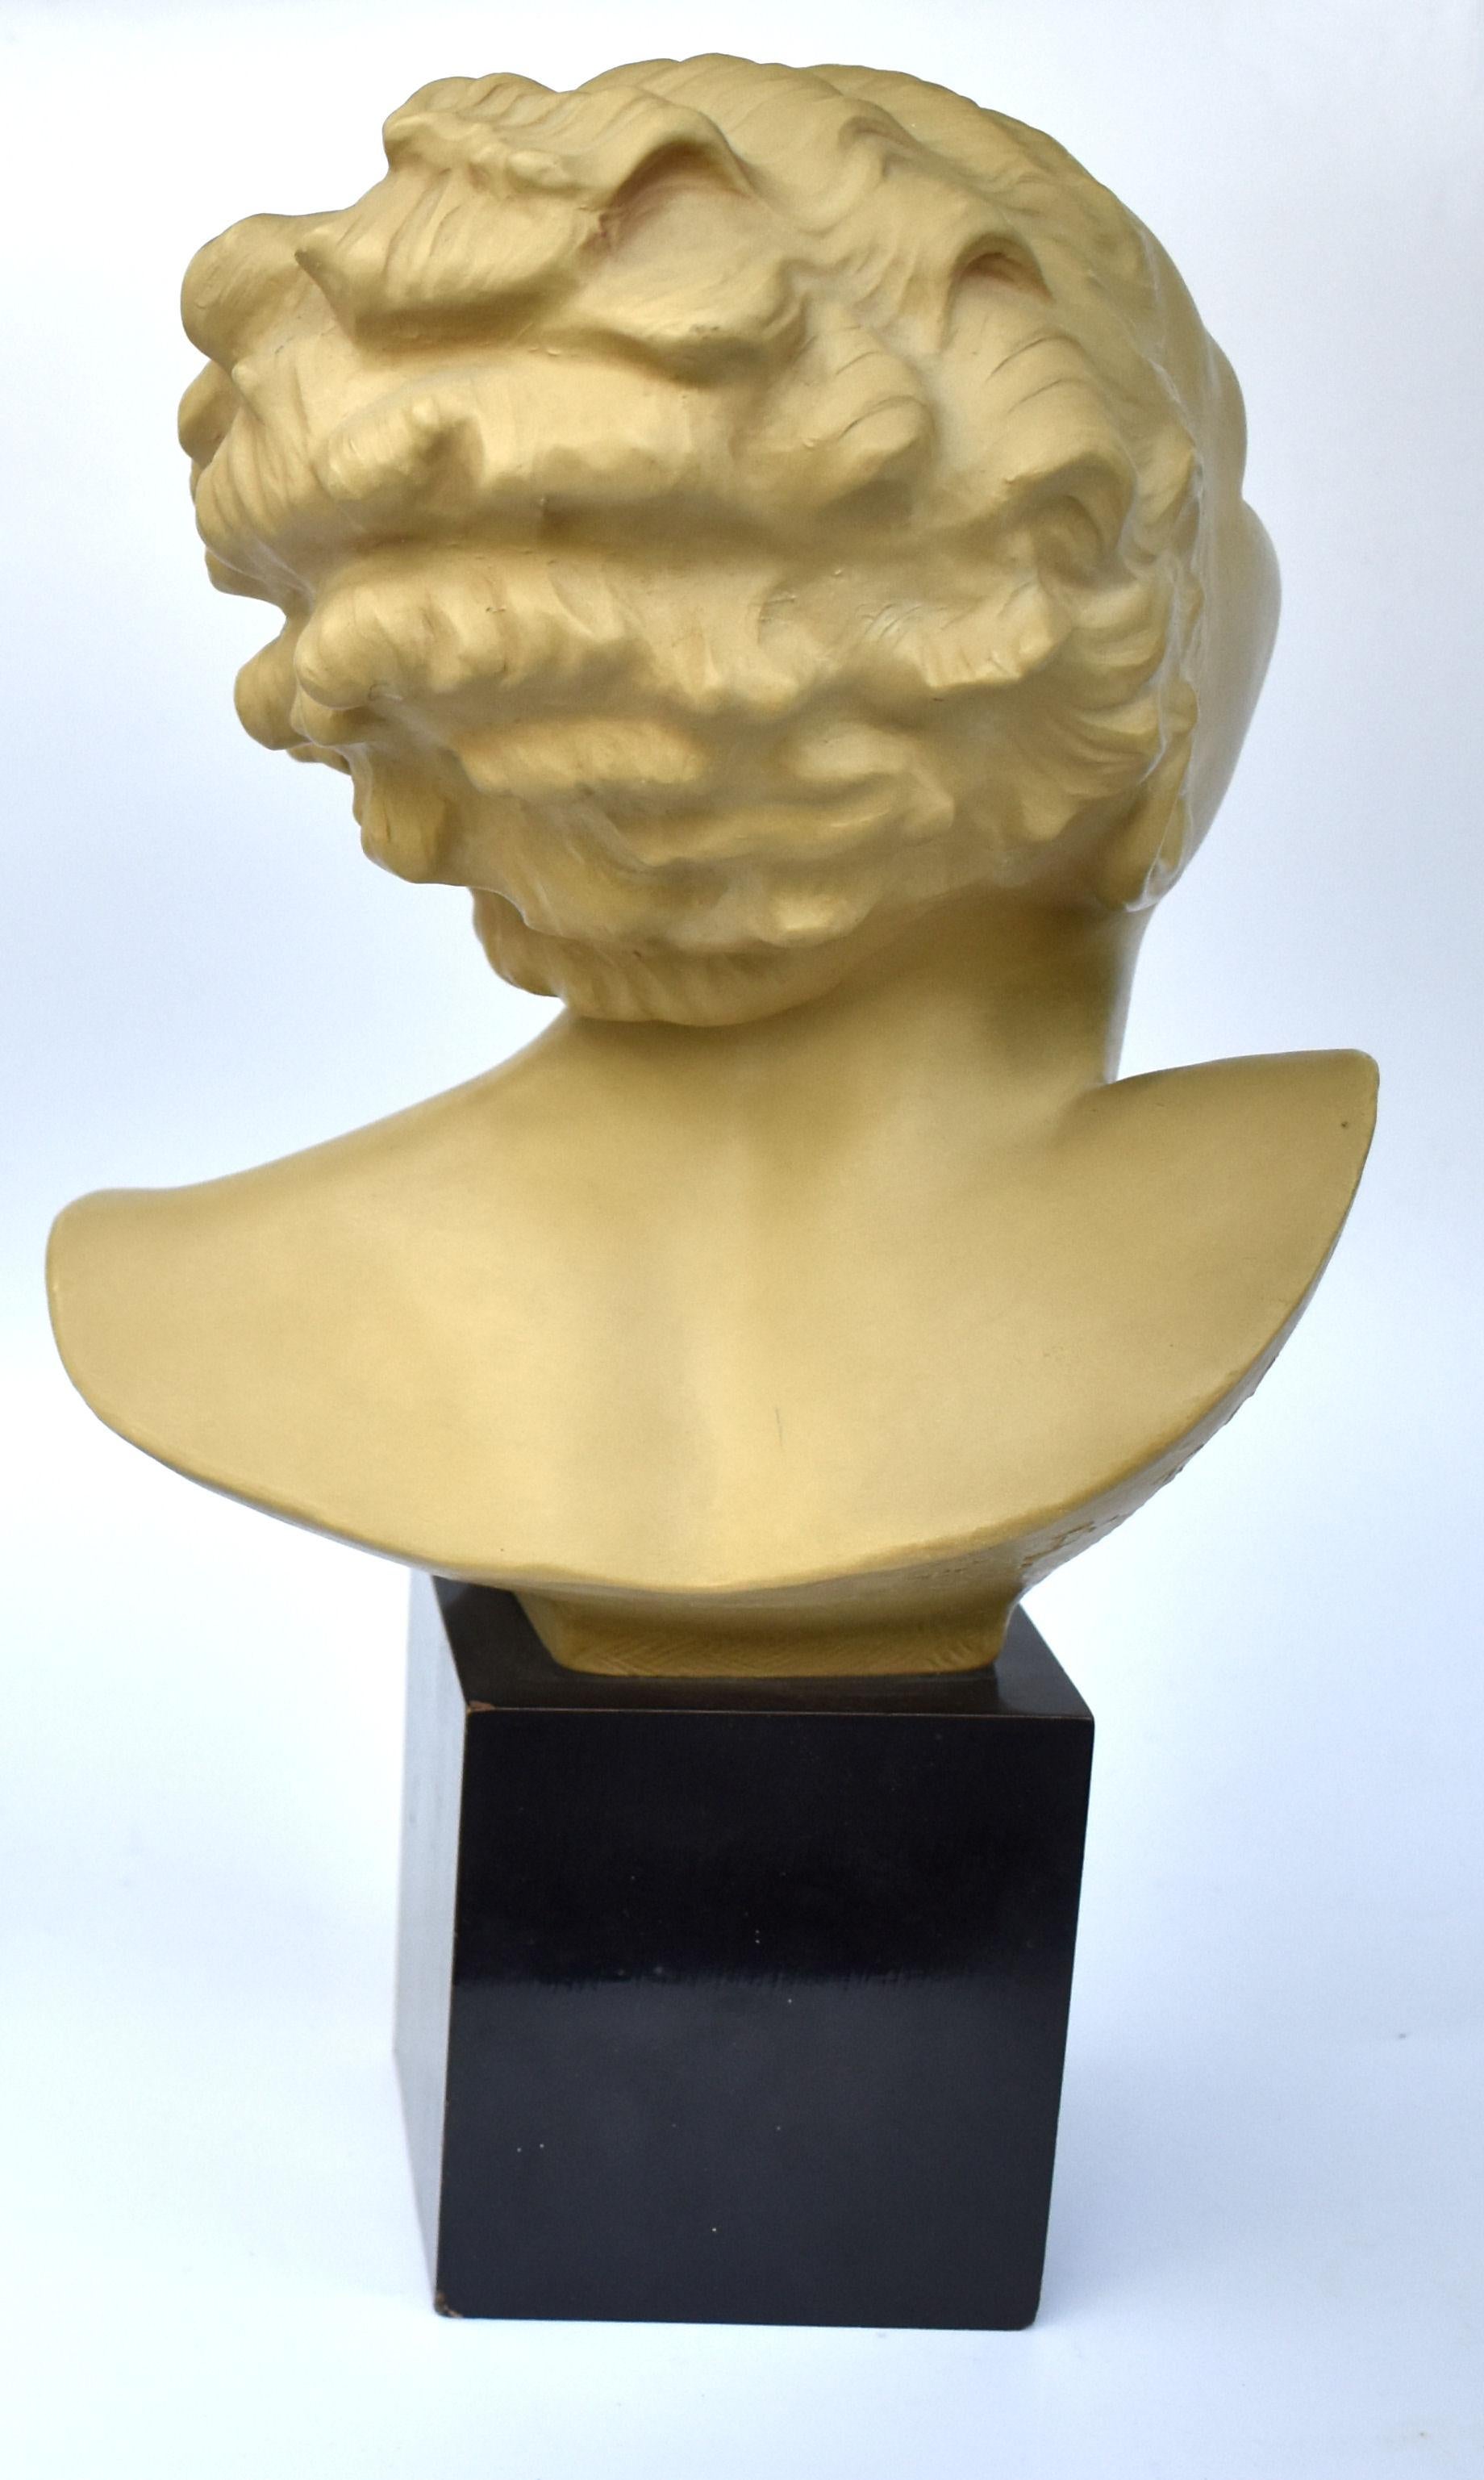 Art Deco Bust On Stand, c1930 By Bohumil Rezl In Good Condition For Sale In Devon, England